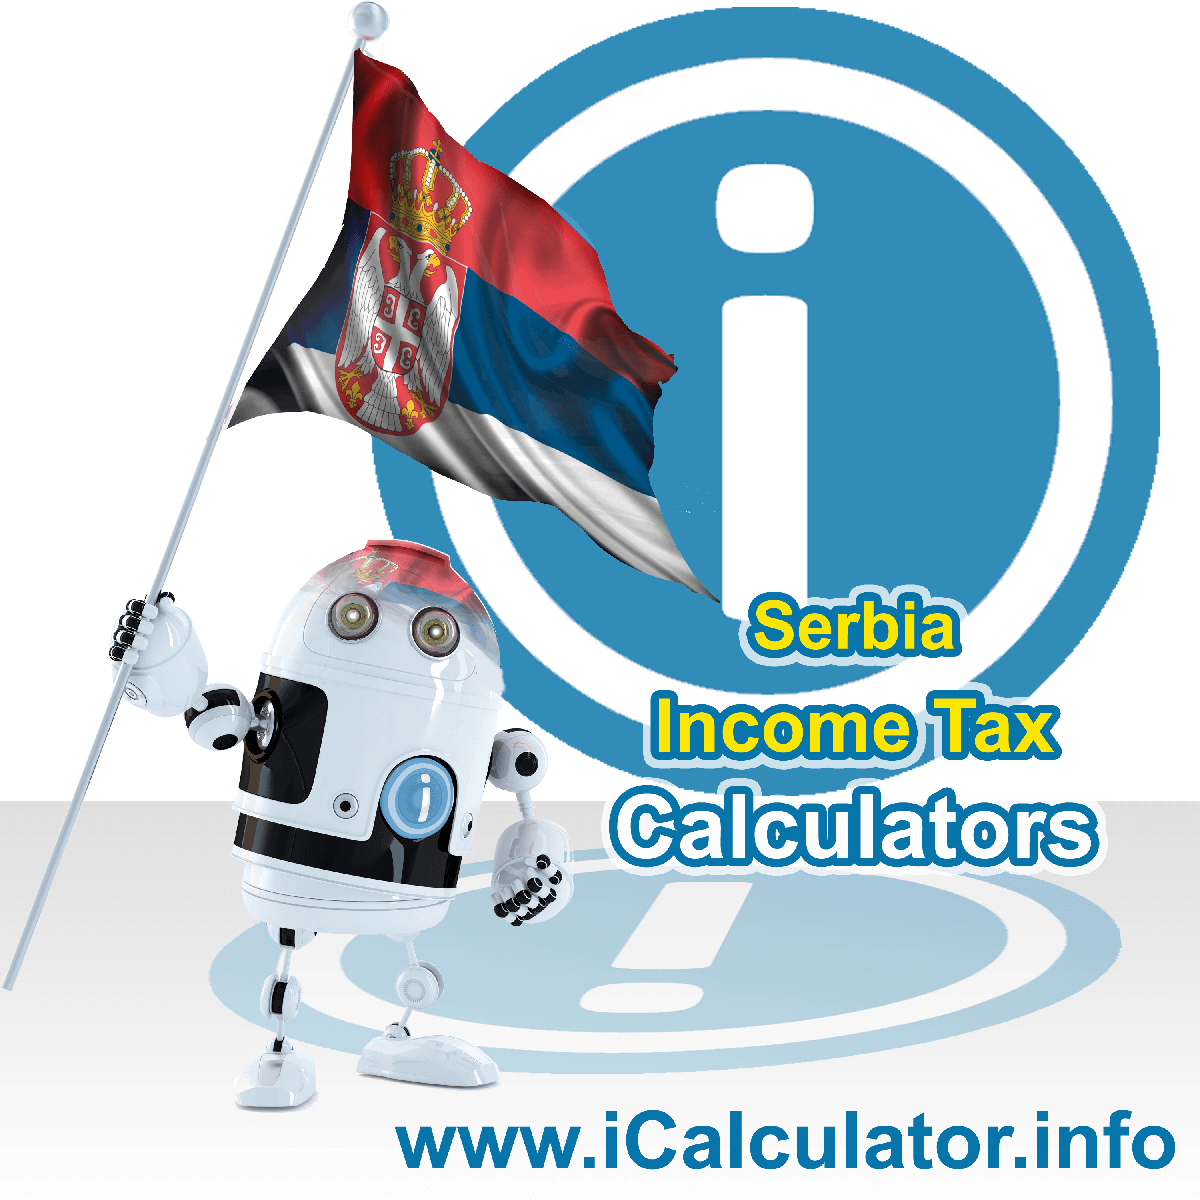 Serbia Income Tax Calculator. This image shows a new employer in Serbia calculating the annual payroll costs based on multiple payroll payments in one year in Serbia using the Serbia income tax calculator to understand their payroll costs in Serbia in 2023